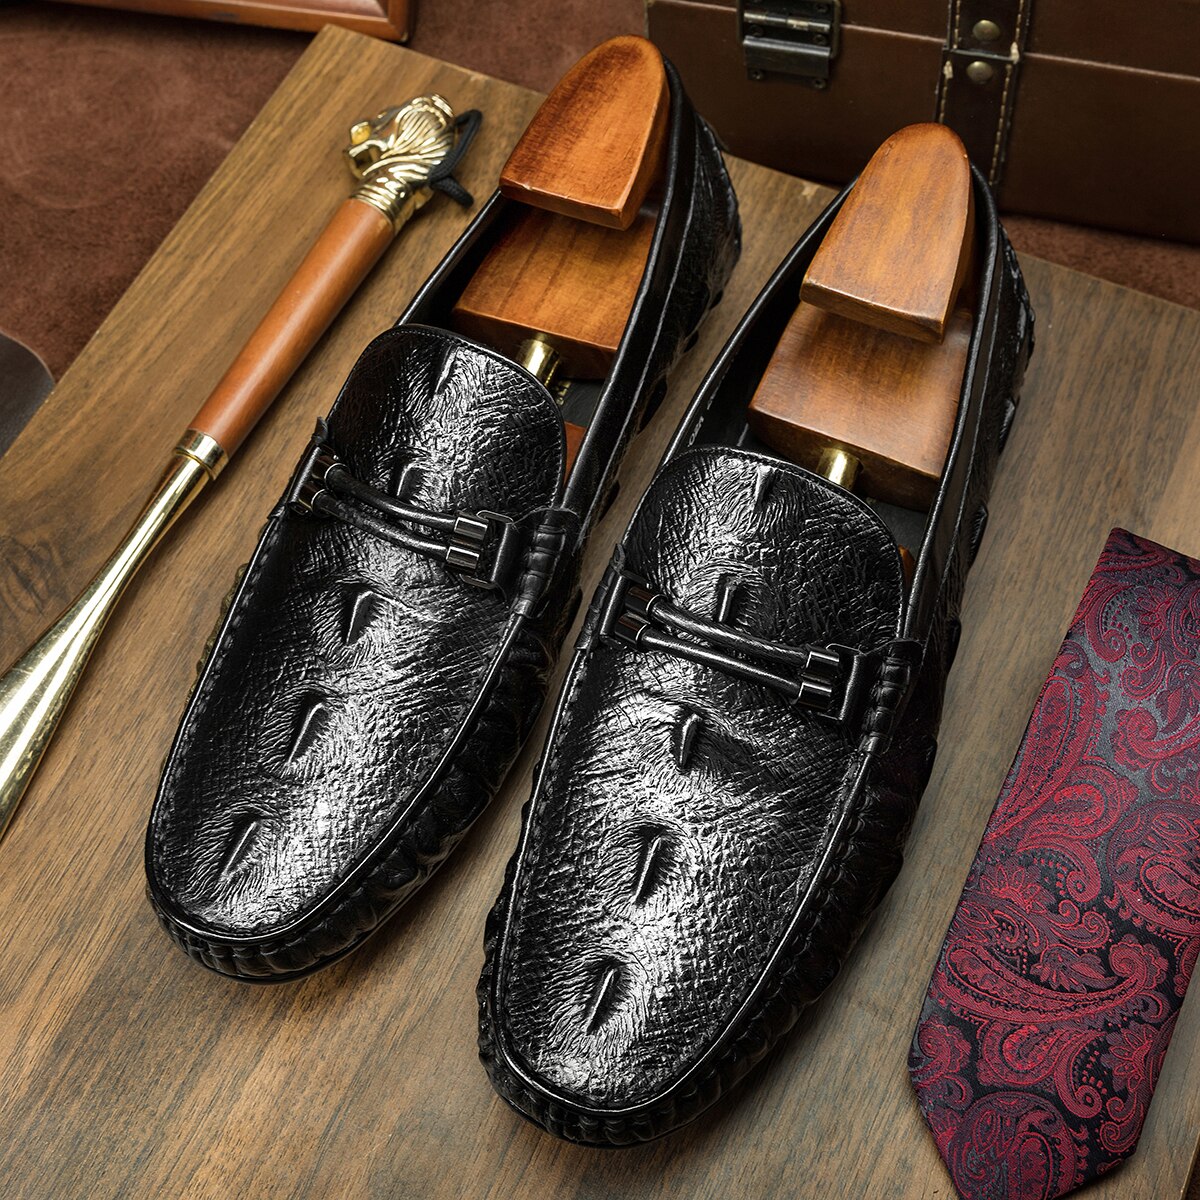 2021 New Design Loafers Men Genuine Leather Slip-on Shoes